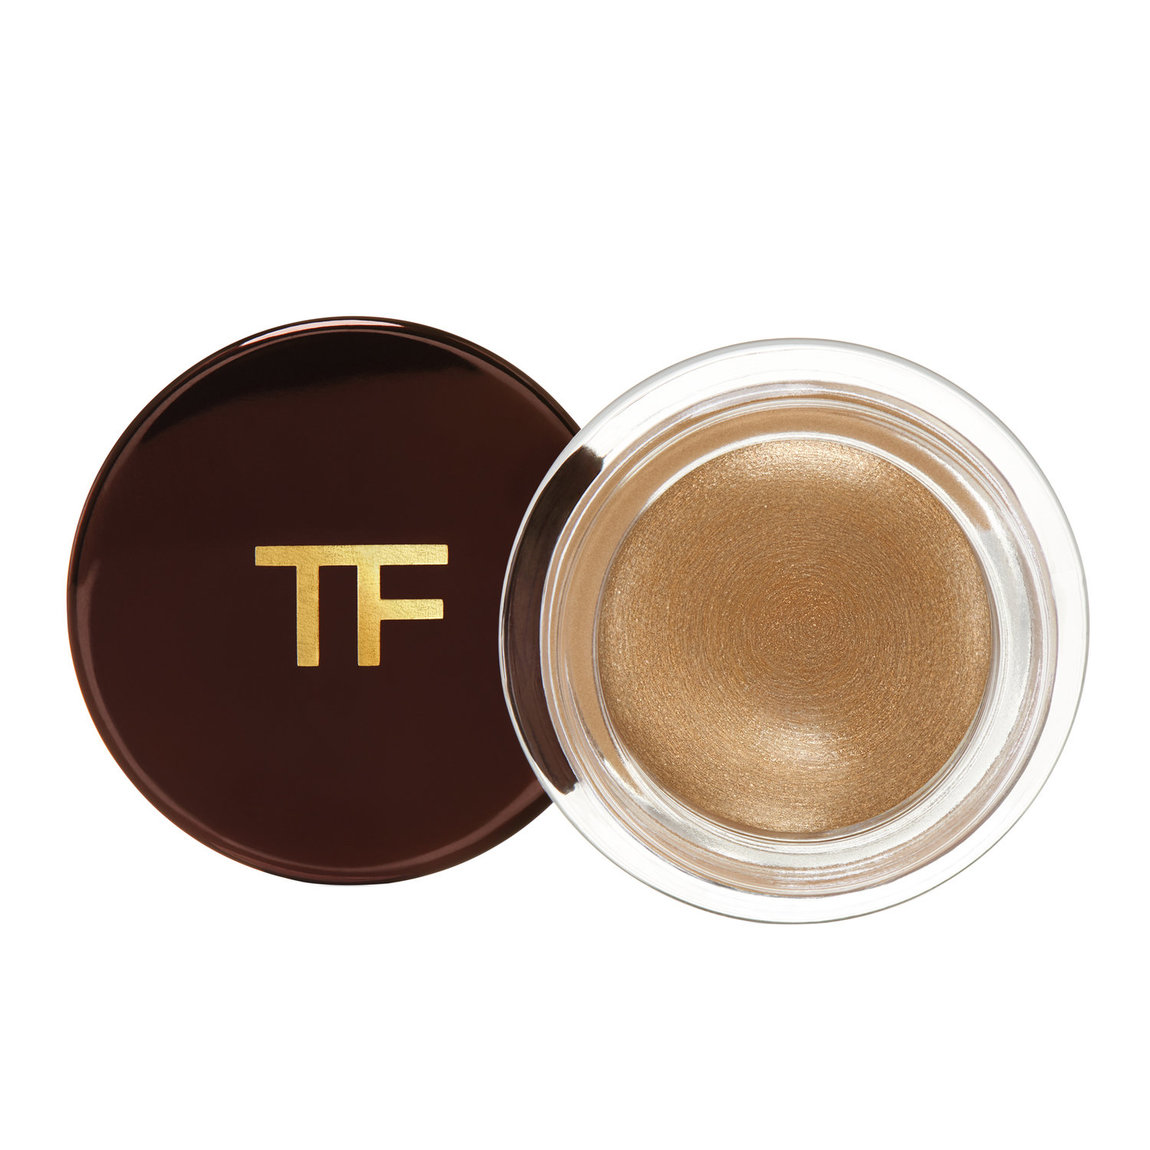 TOM FORD Emotionproof Eye Color 6 Starmaker alternative view 1 - product swatch.